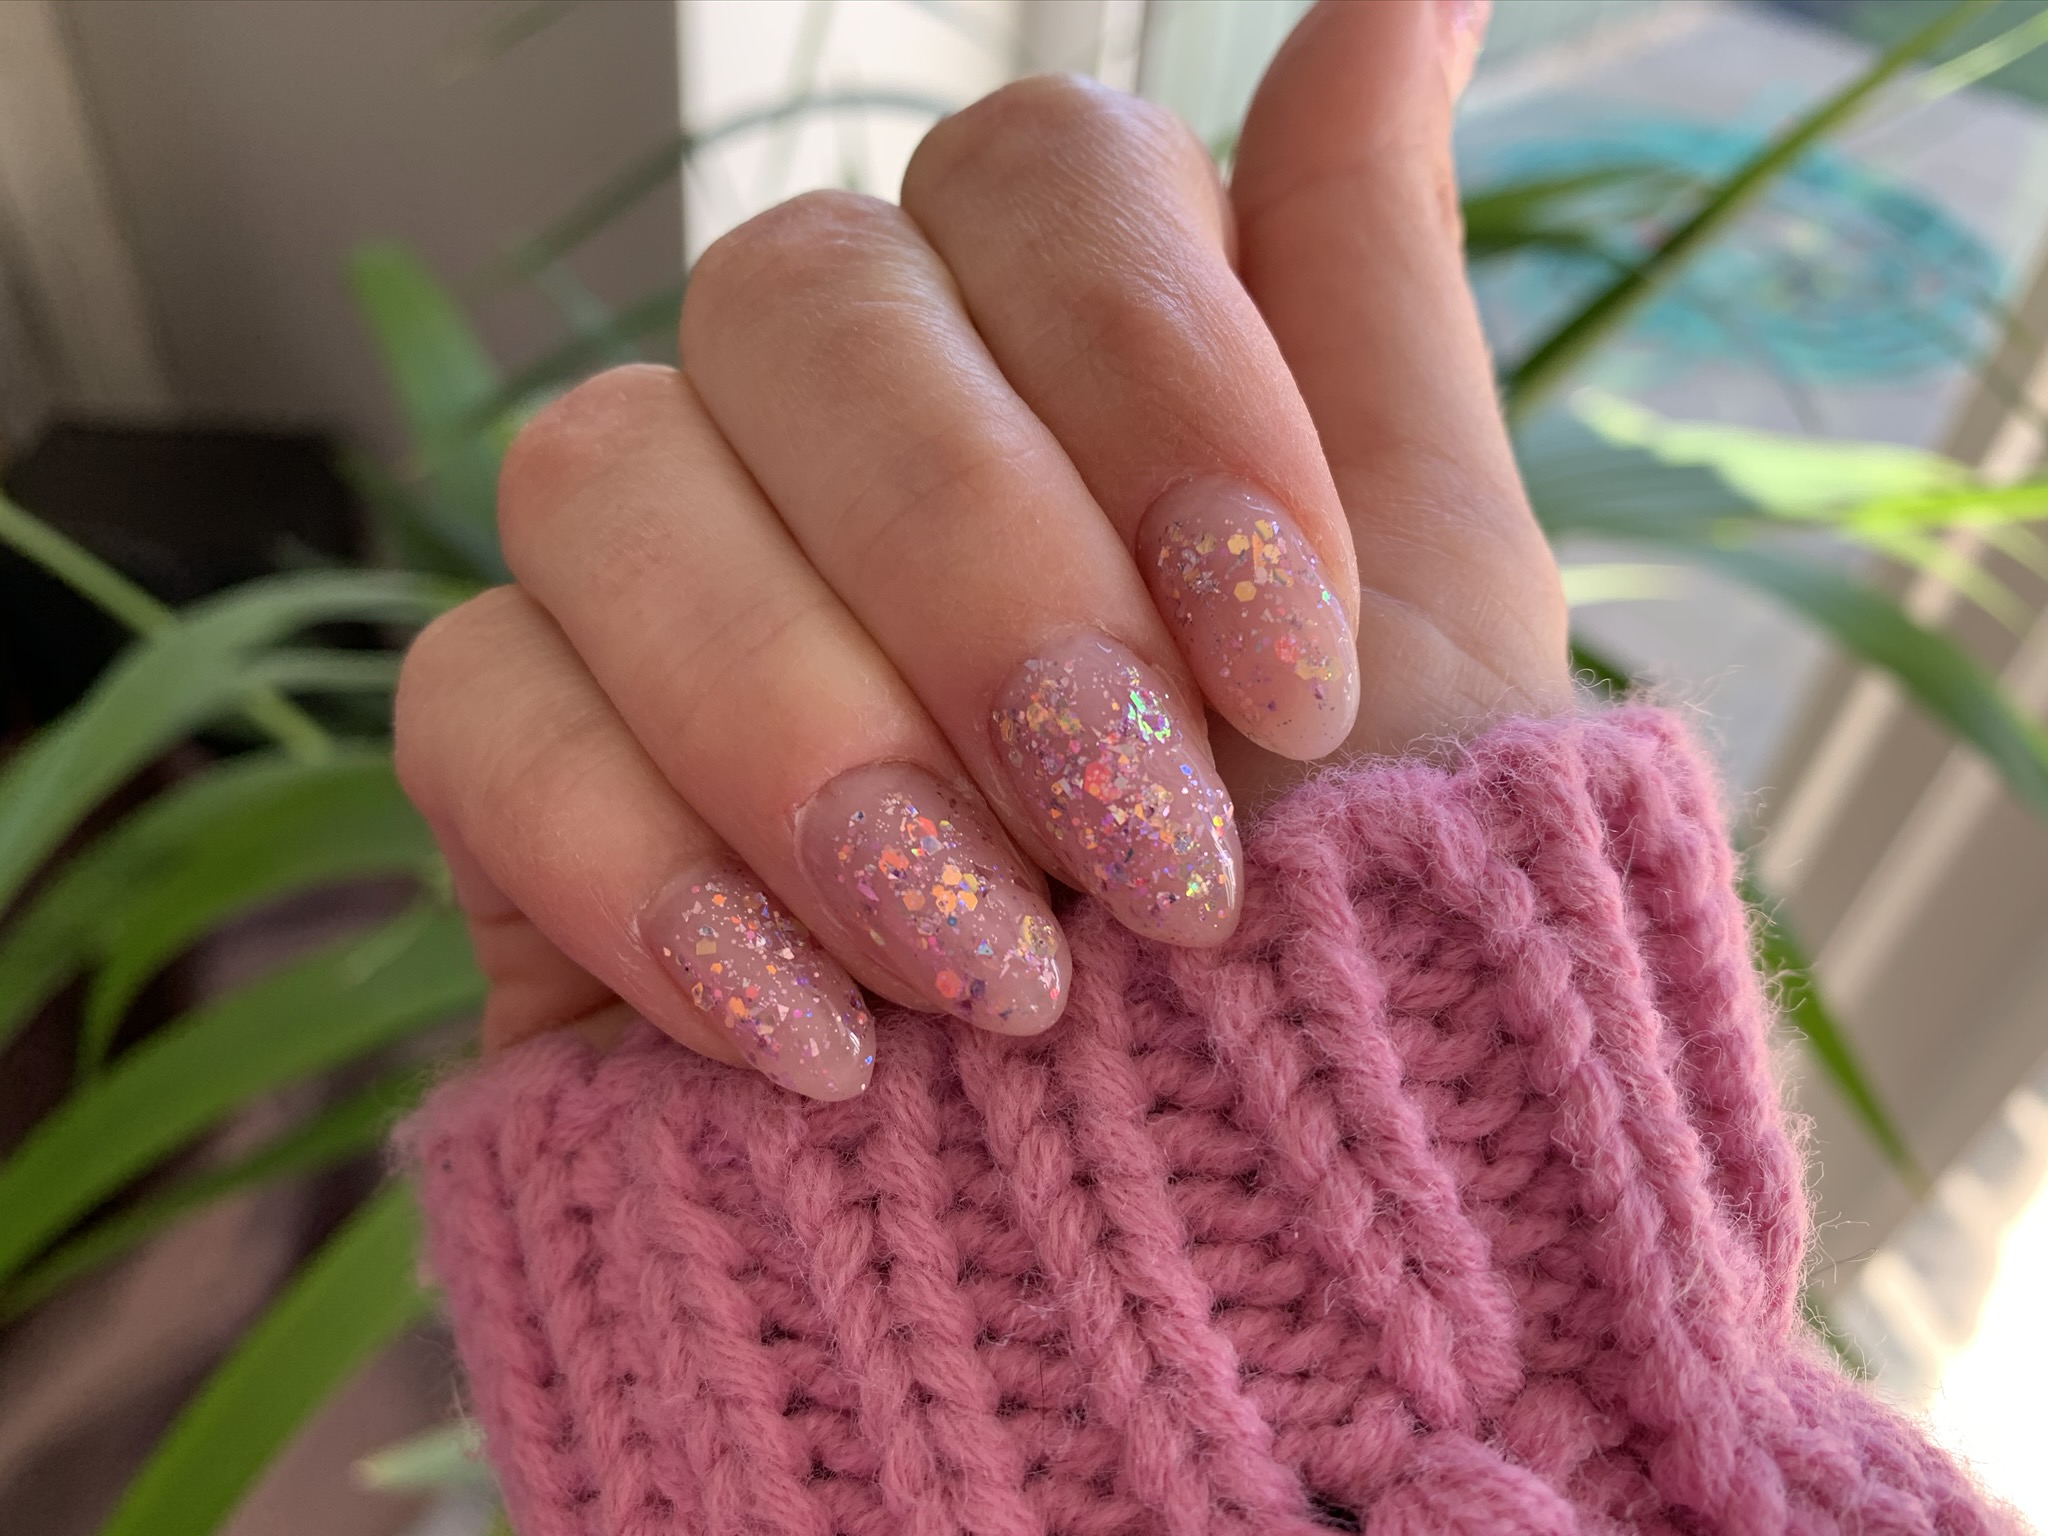 Doing your own PolyGel nails at home Through New Eyes